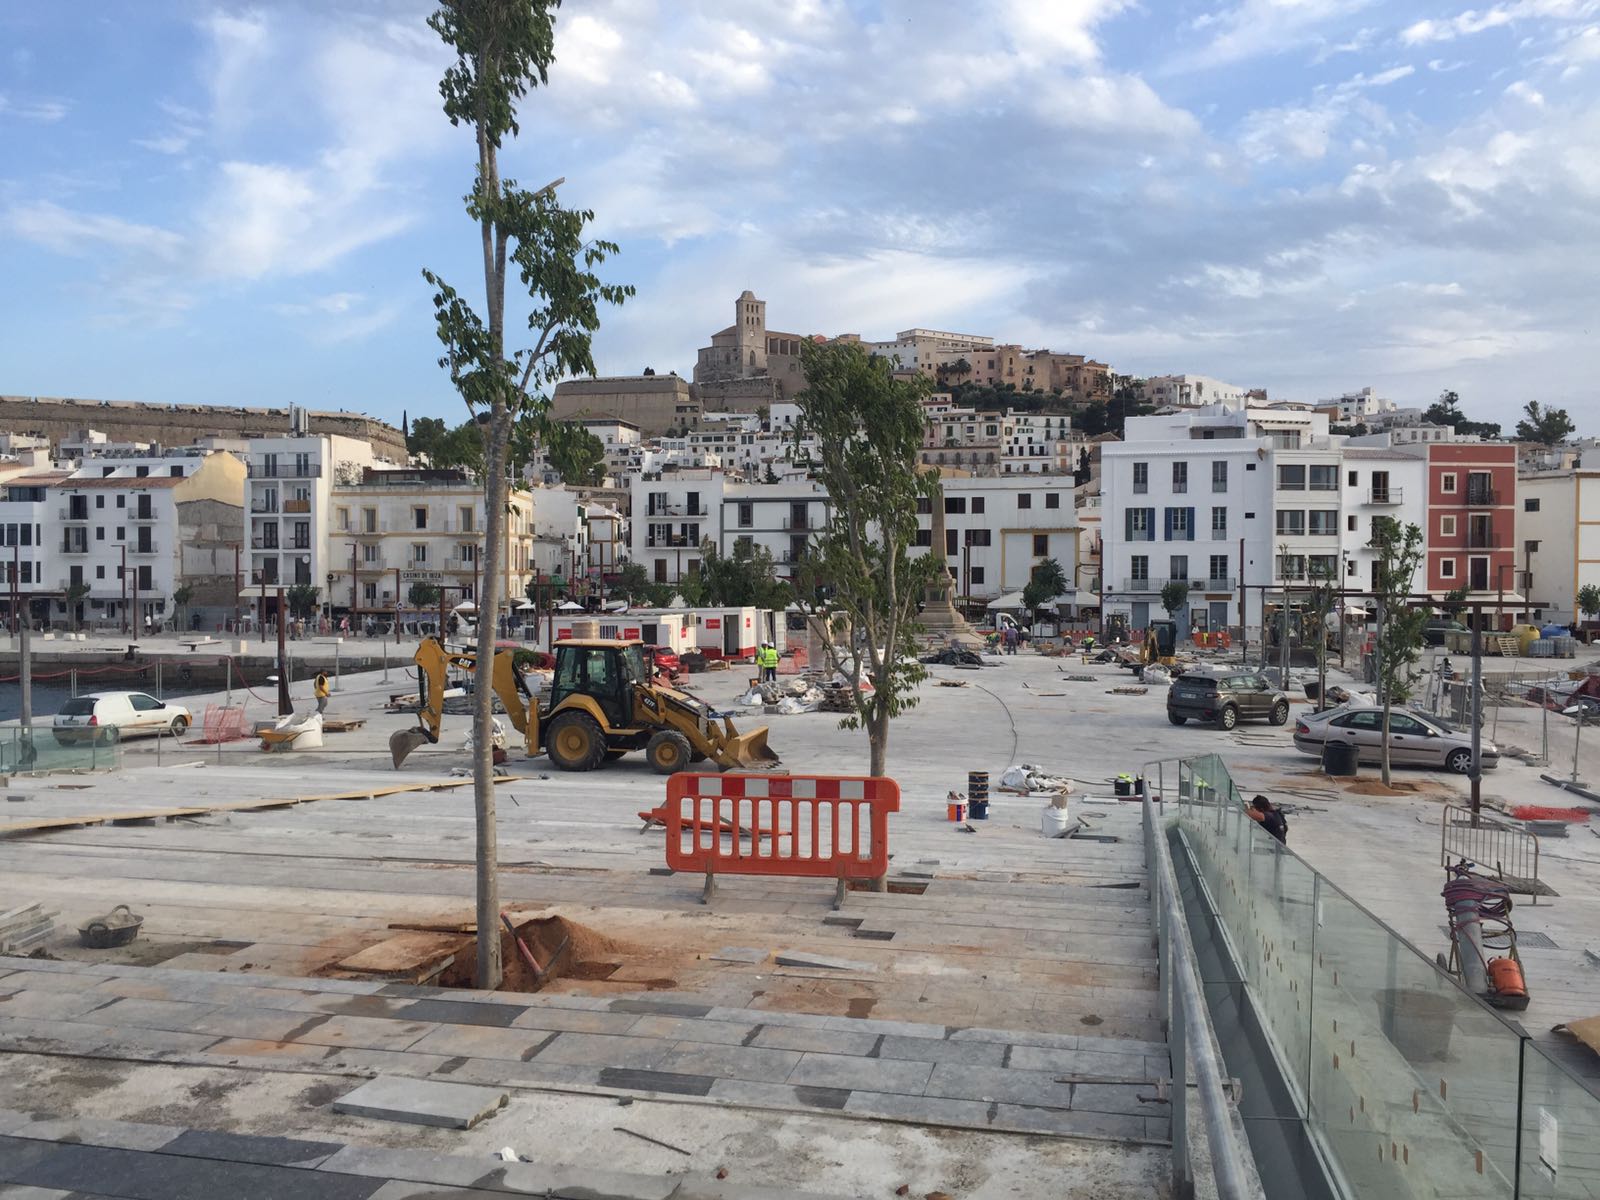 The APB opens Es Martell square and the dock of the Port of Ibiza Marina to the public